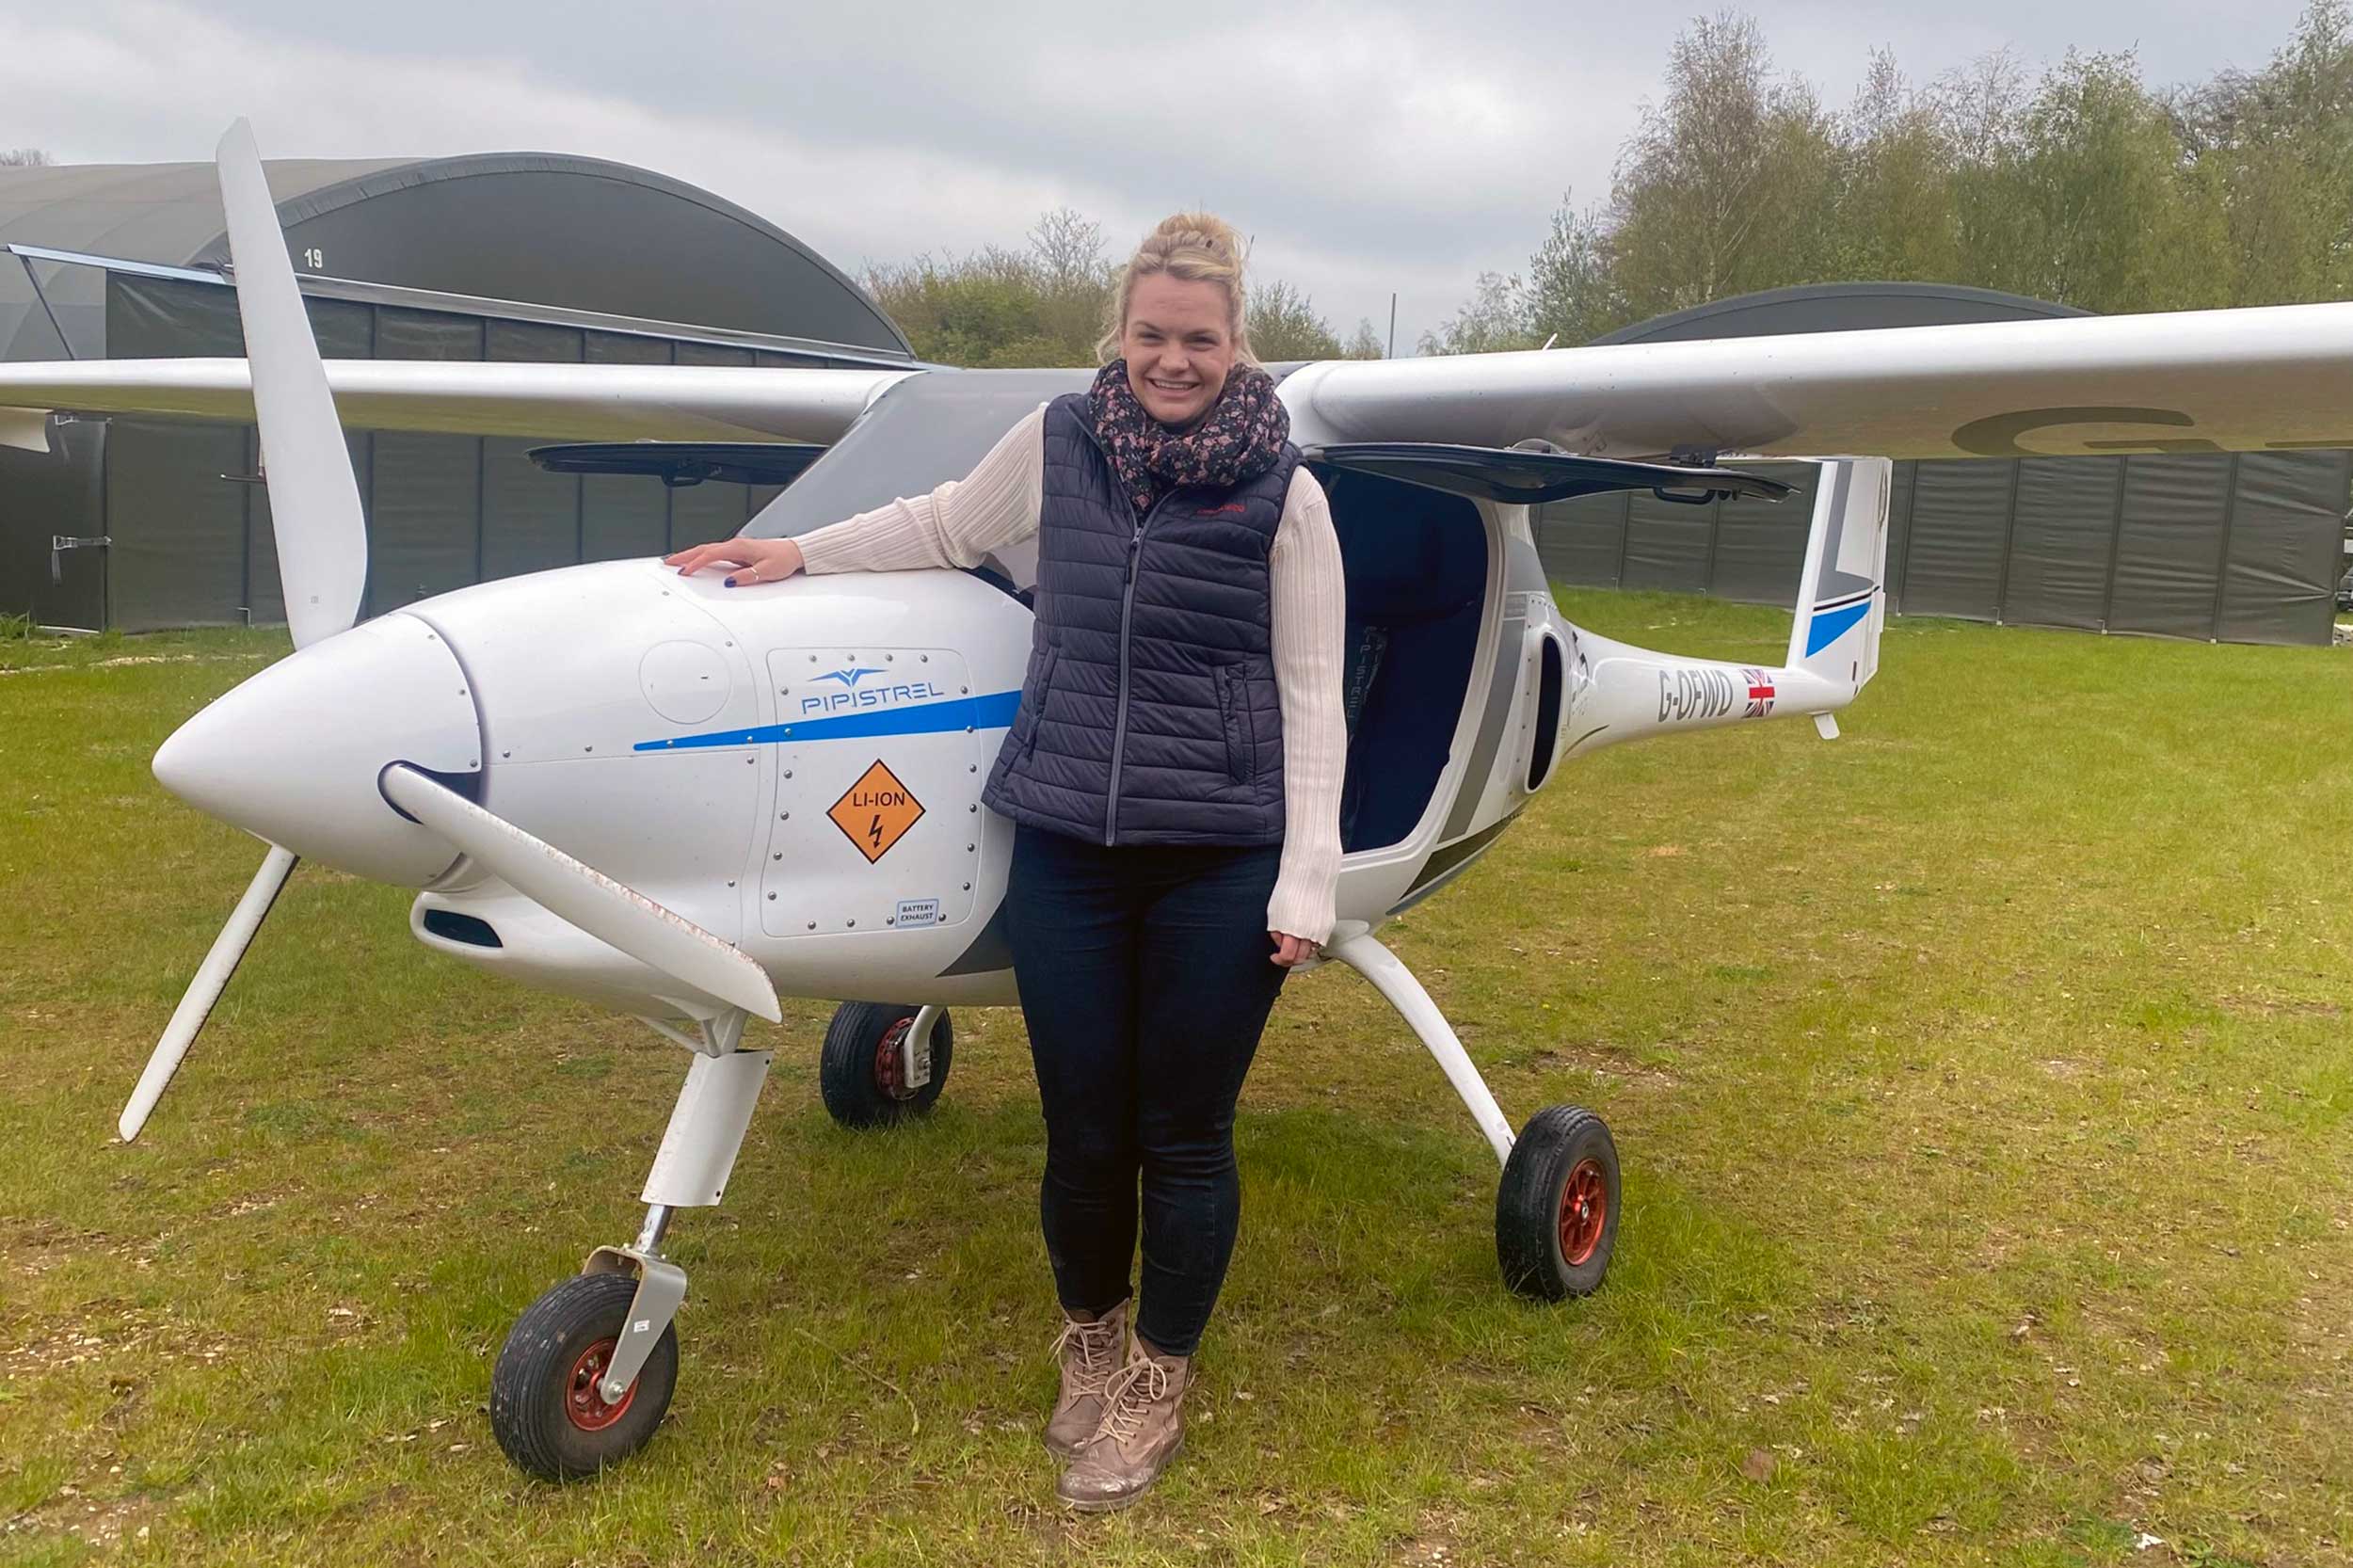 Airbourne PPL student has passed Differences Training to fly the Pipistrel Velis Electro